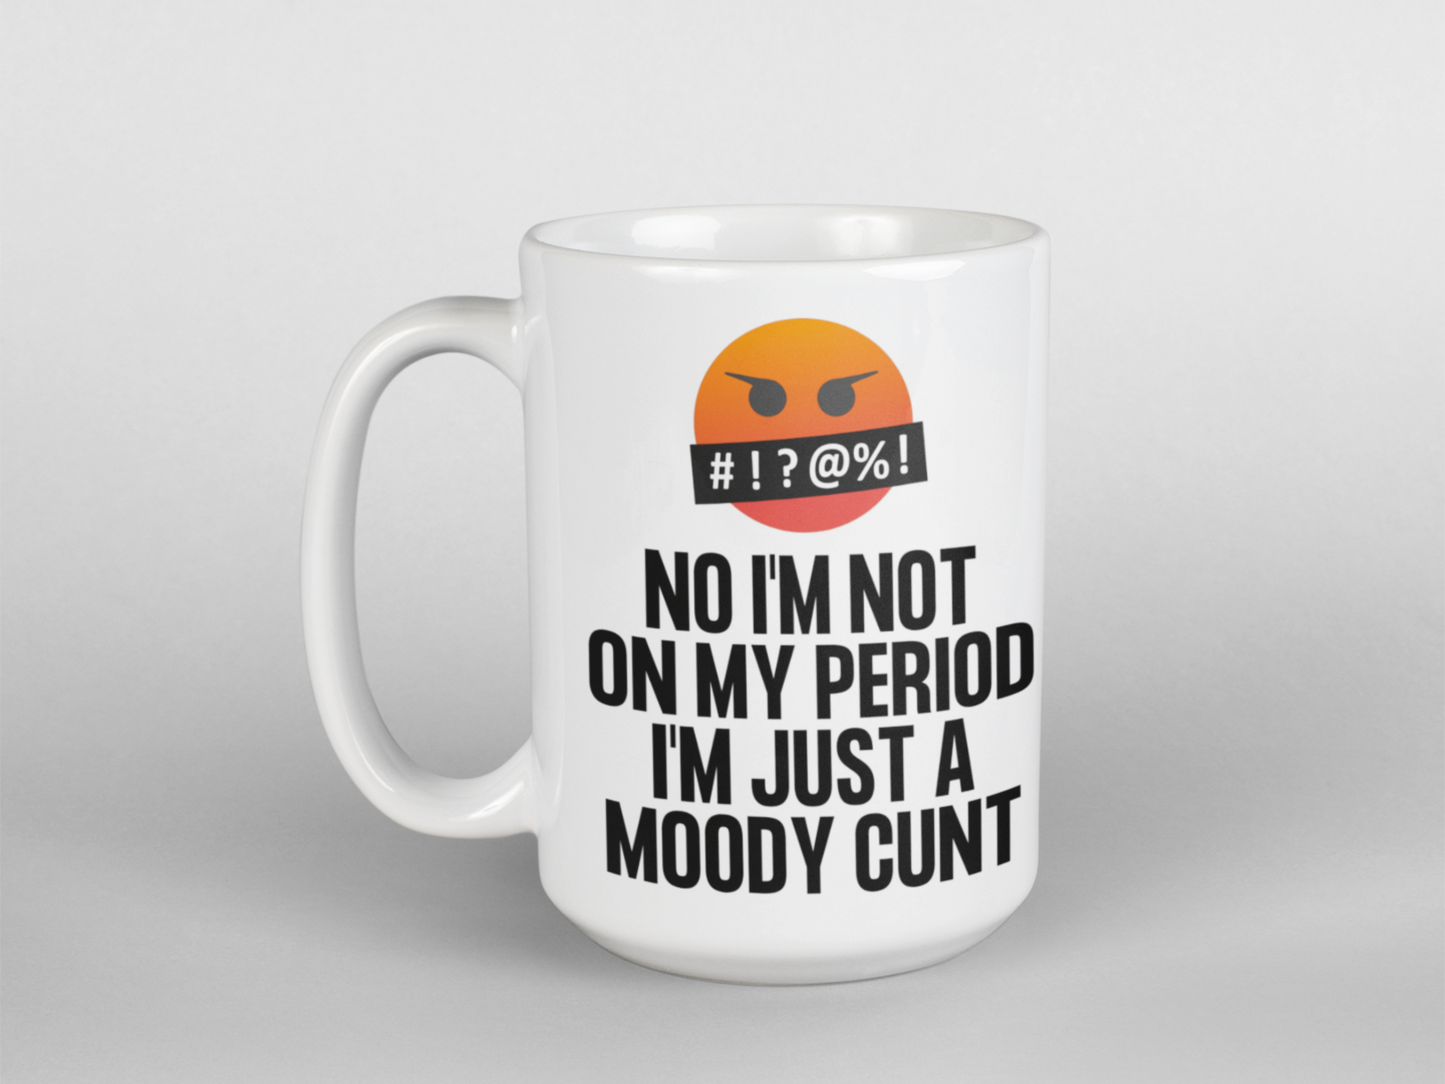 No I'm not on my period just a moody cunt funny coffee mug